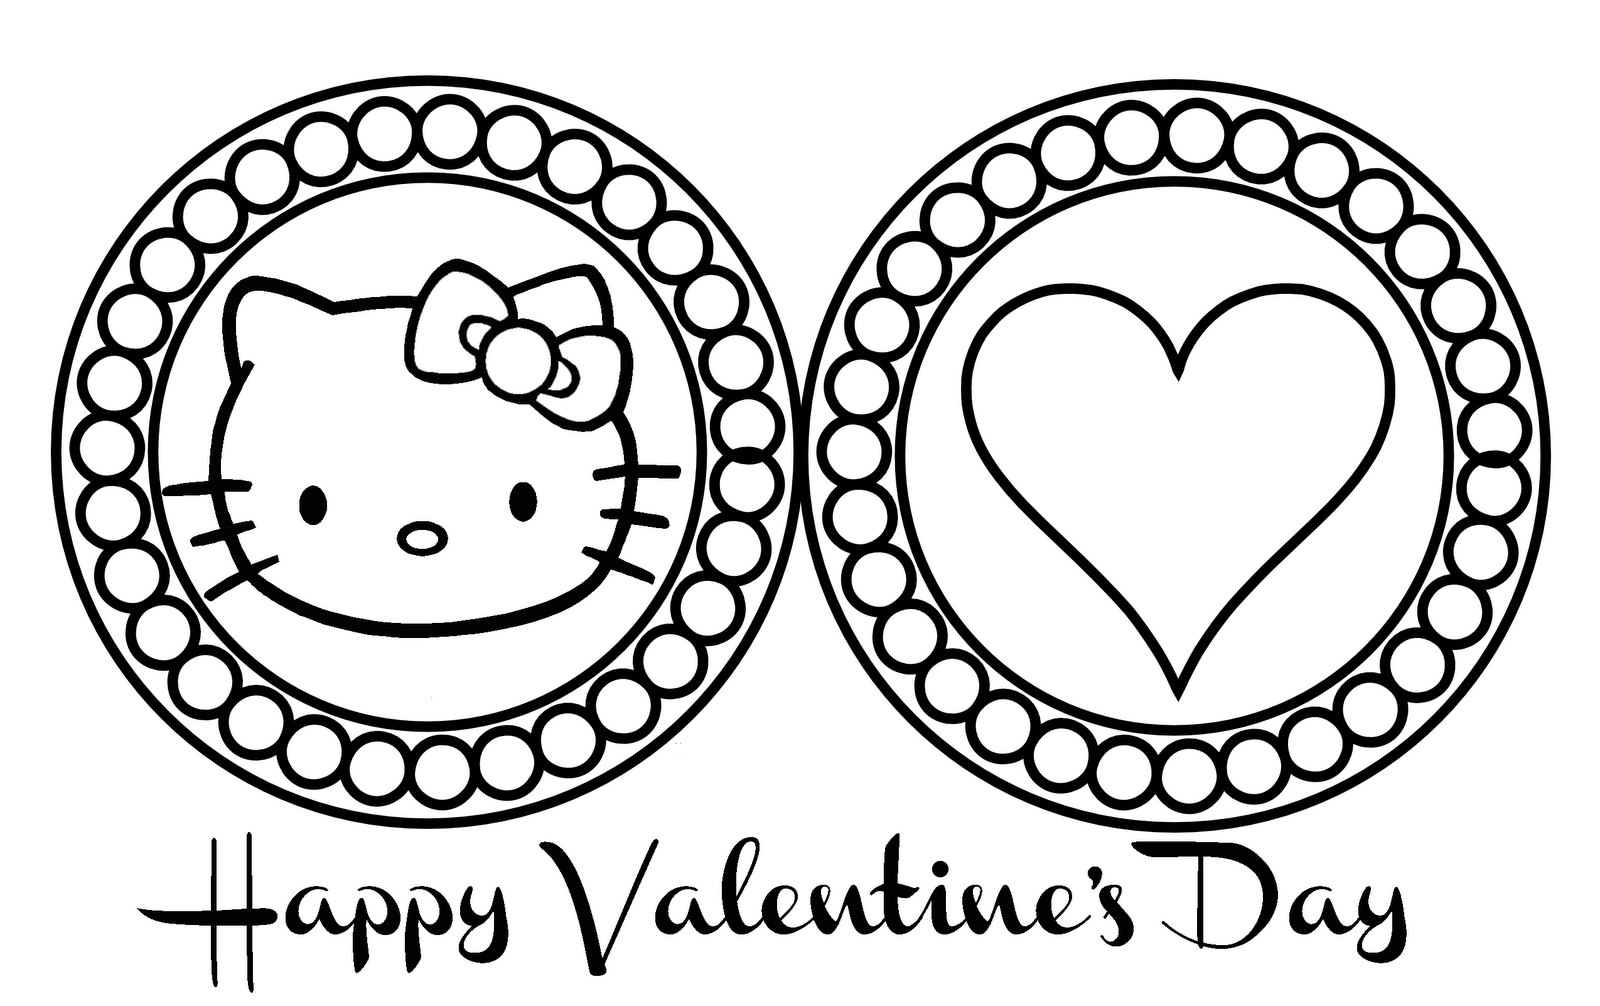 Hello Kitty Valentine's Day Coloring Page Coloring Article - Coloring